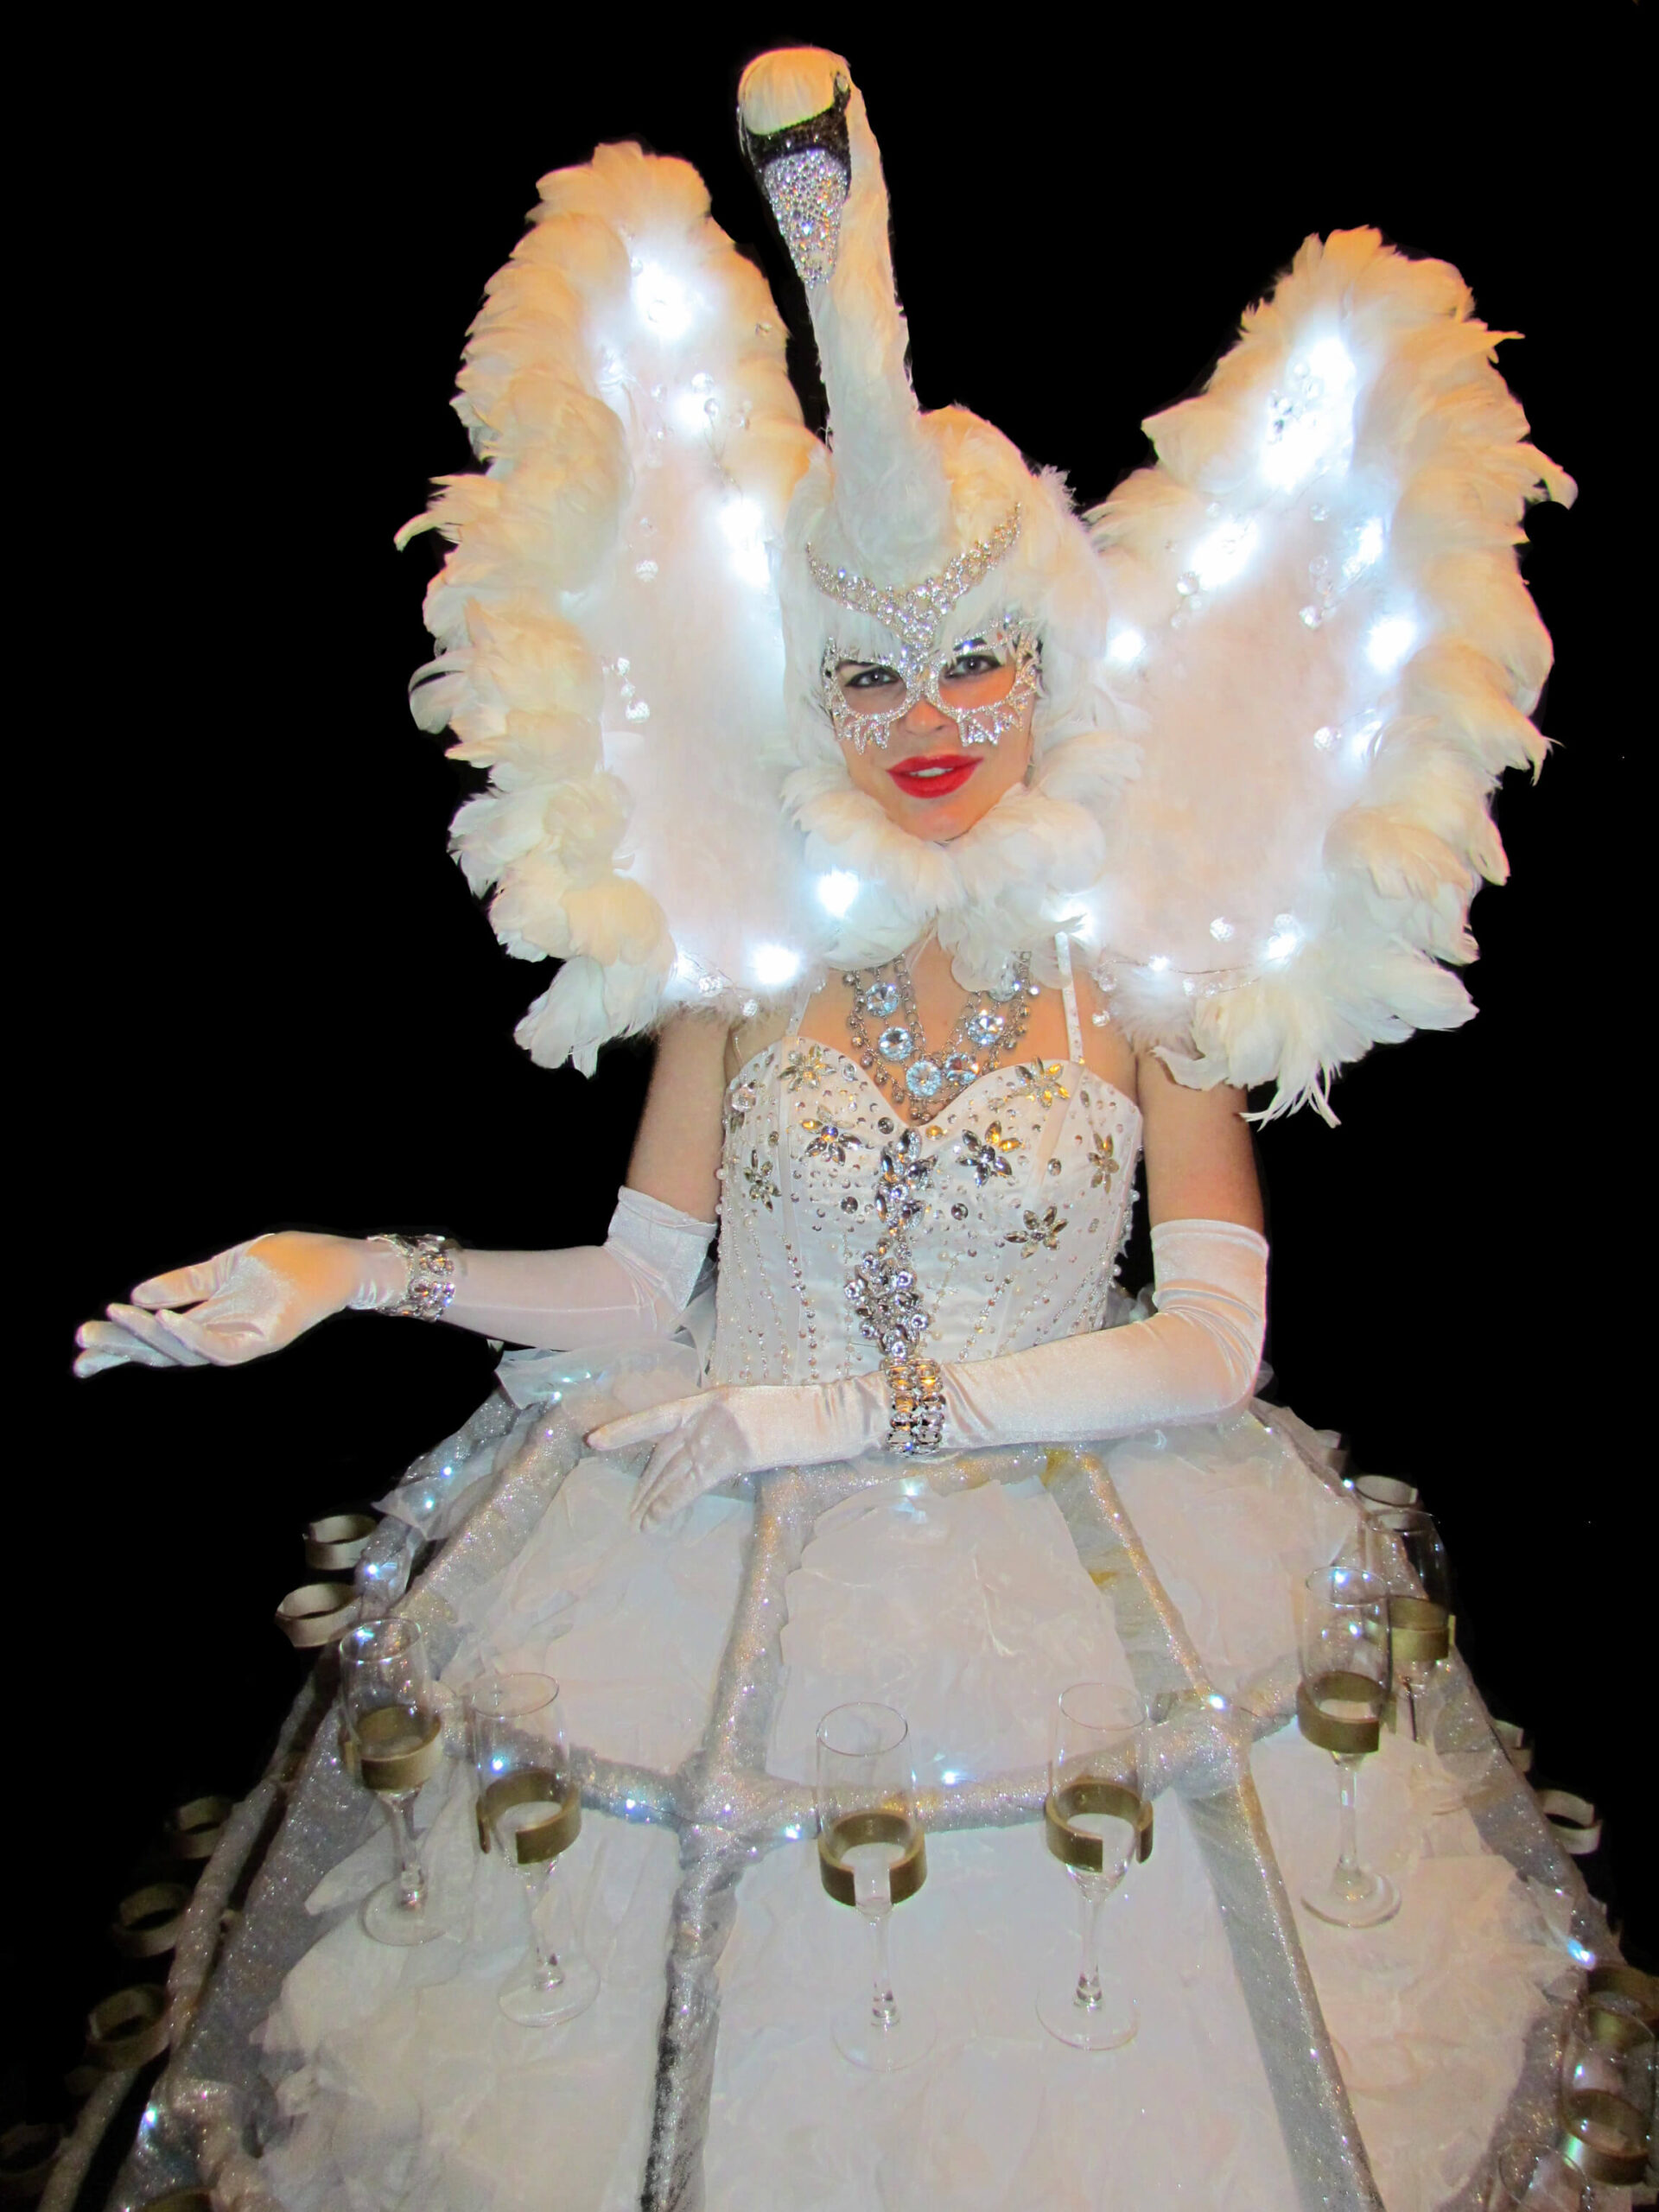 A woman in a swan costume with make up